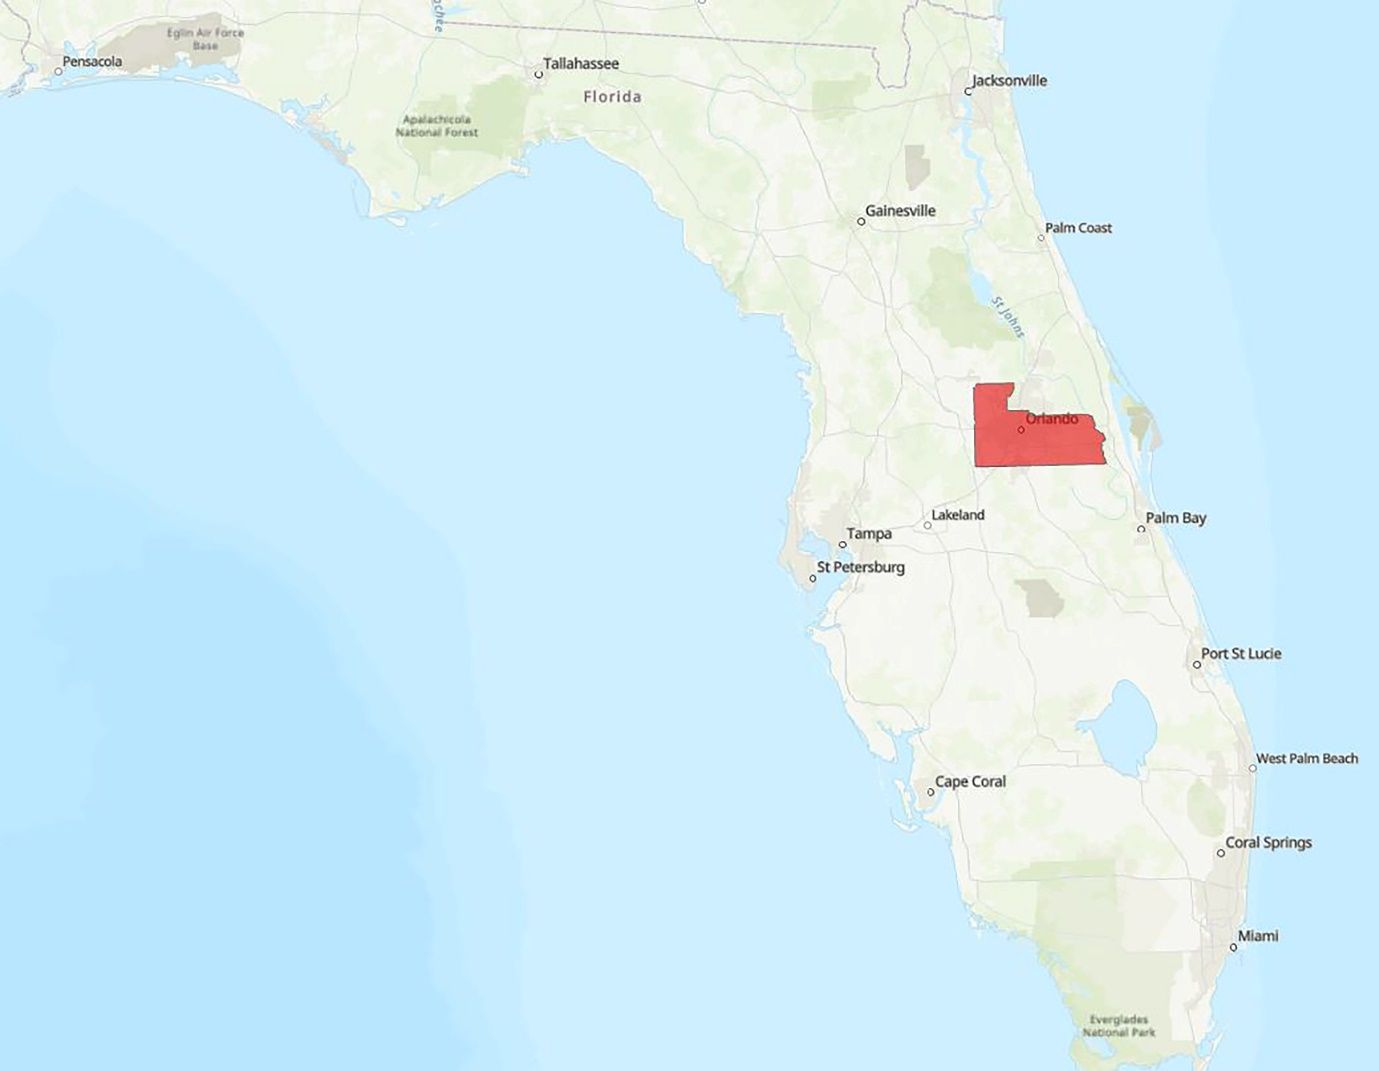 This publication focuses on Orange County, Florida. Orange County is outlined on the map in red.